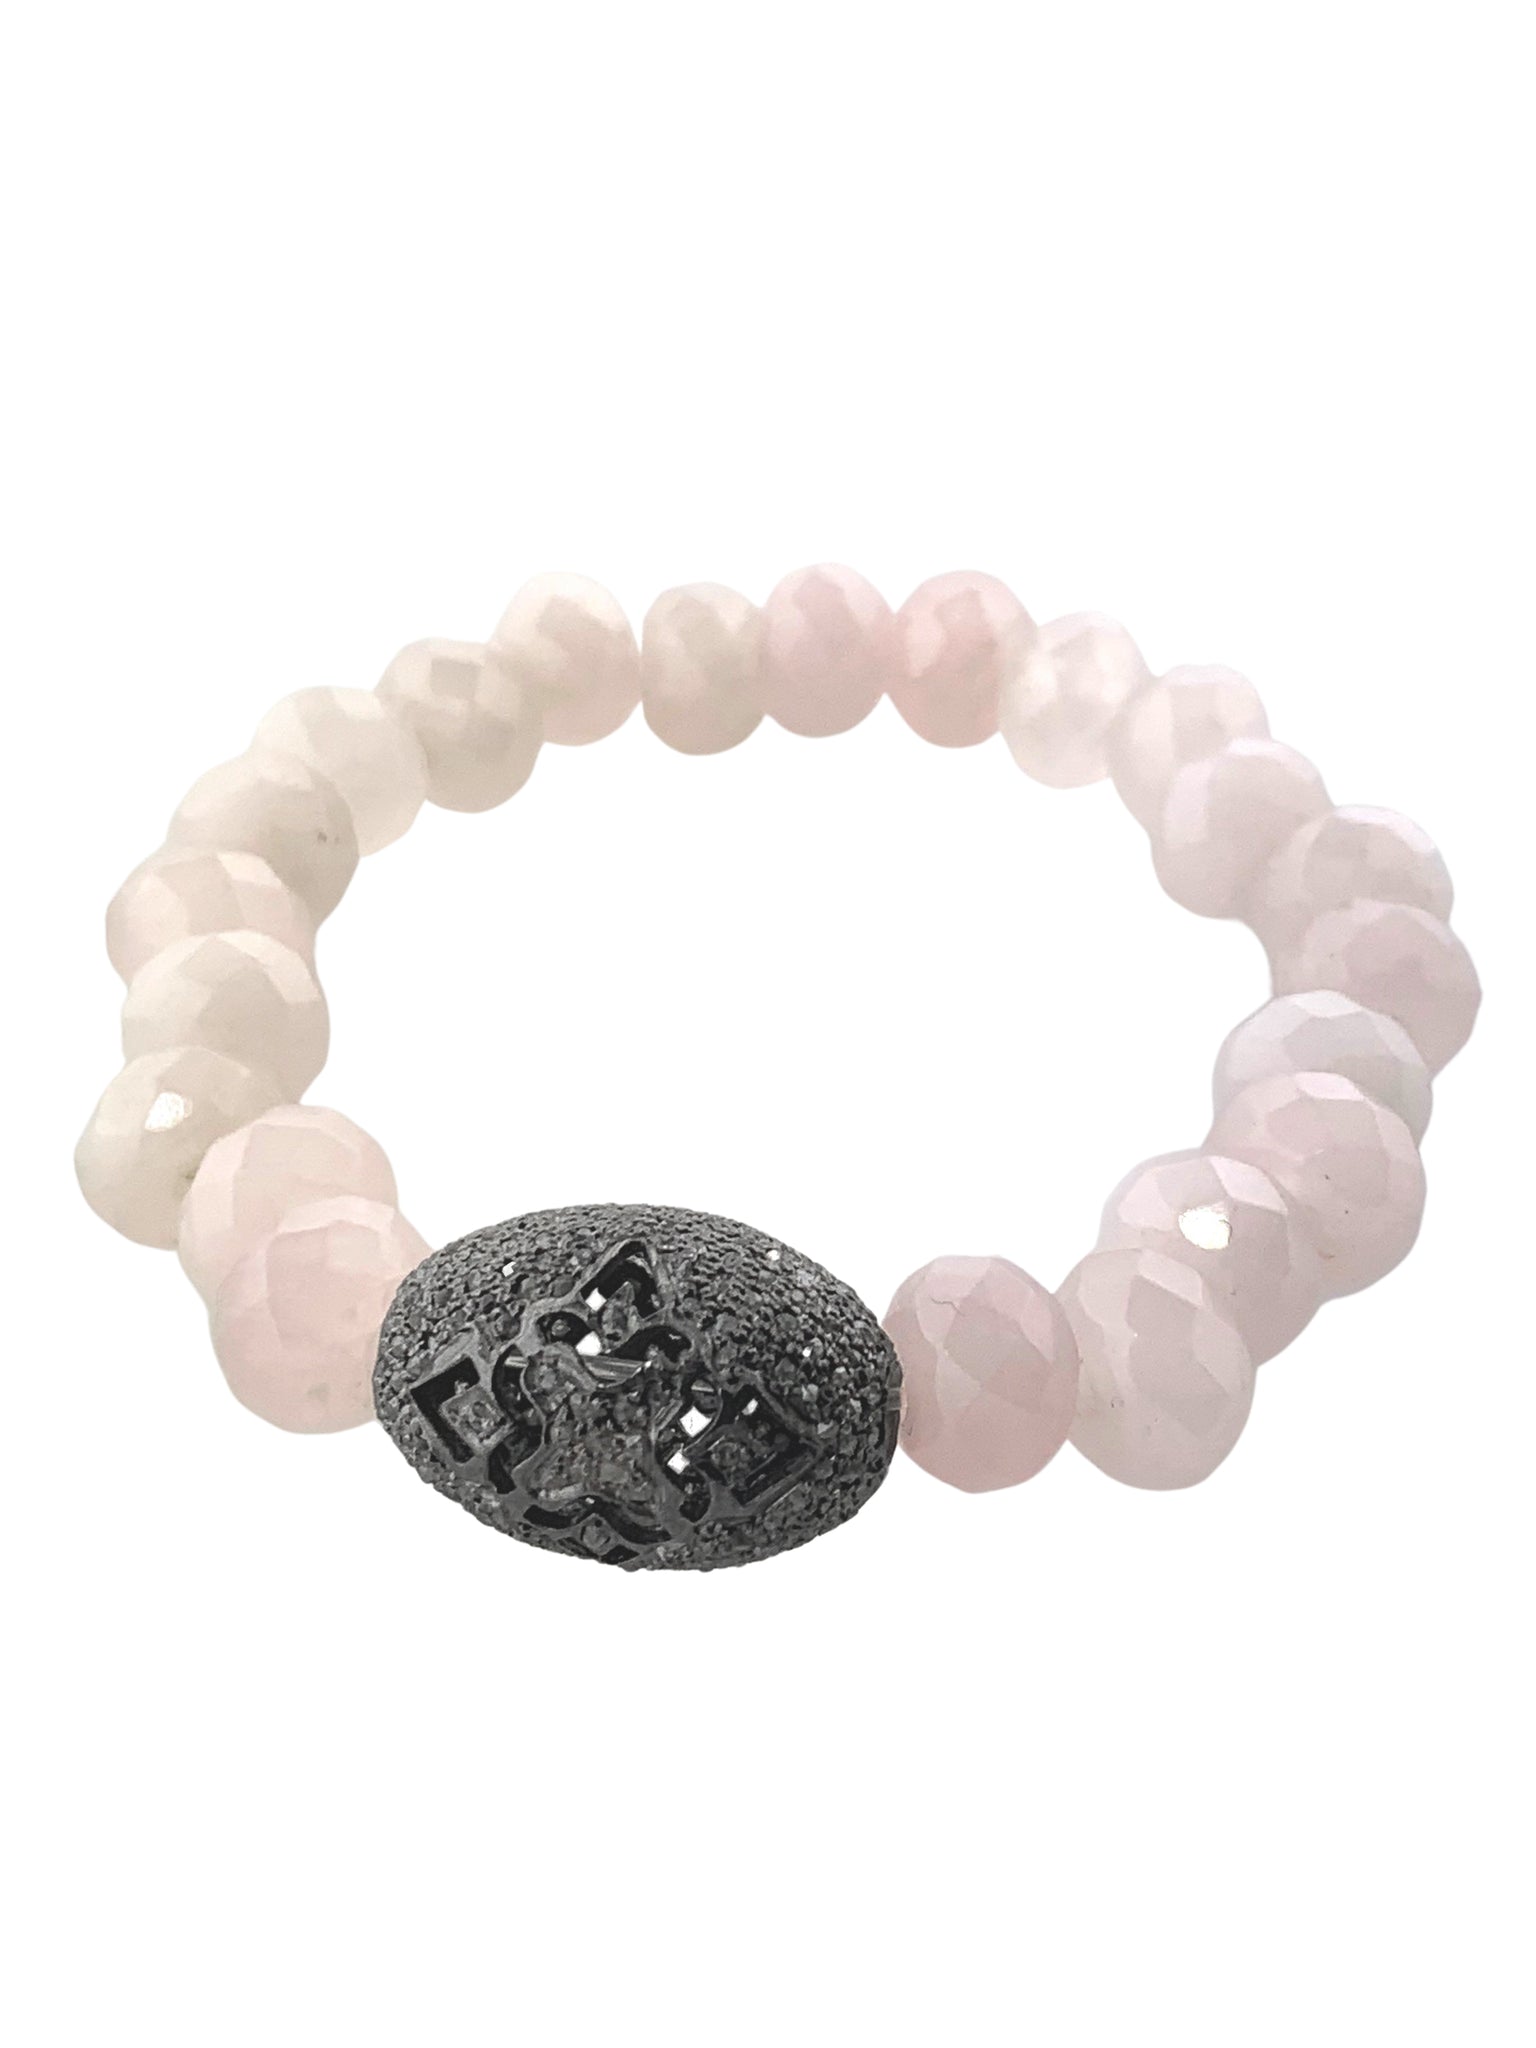 Faceted Rose Quartz with a pave Diamond Bead